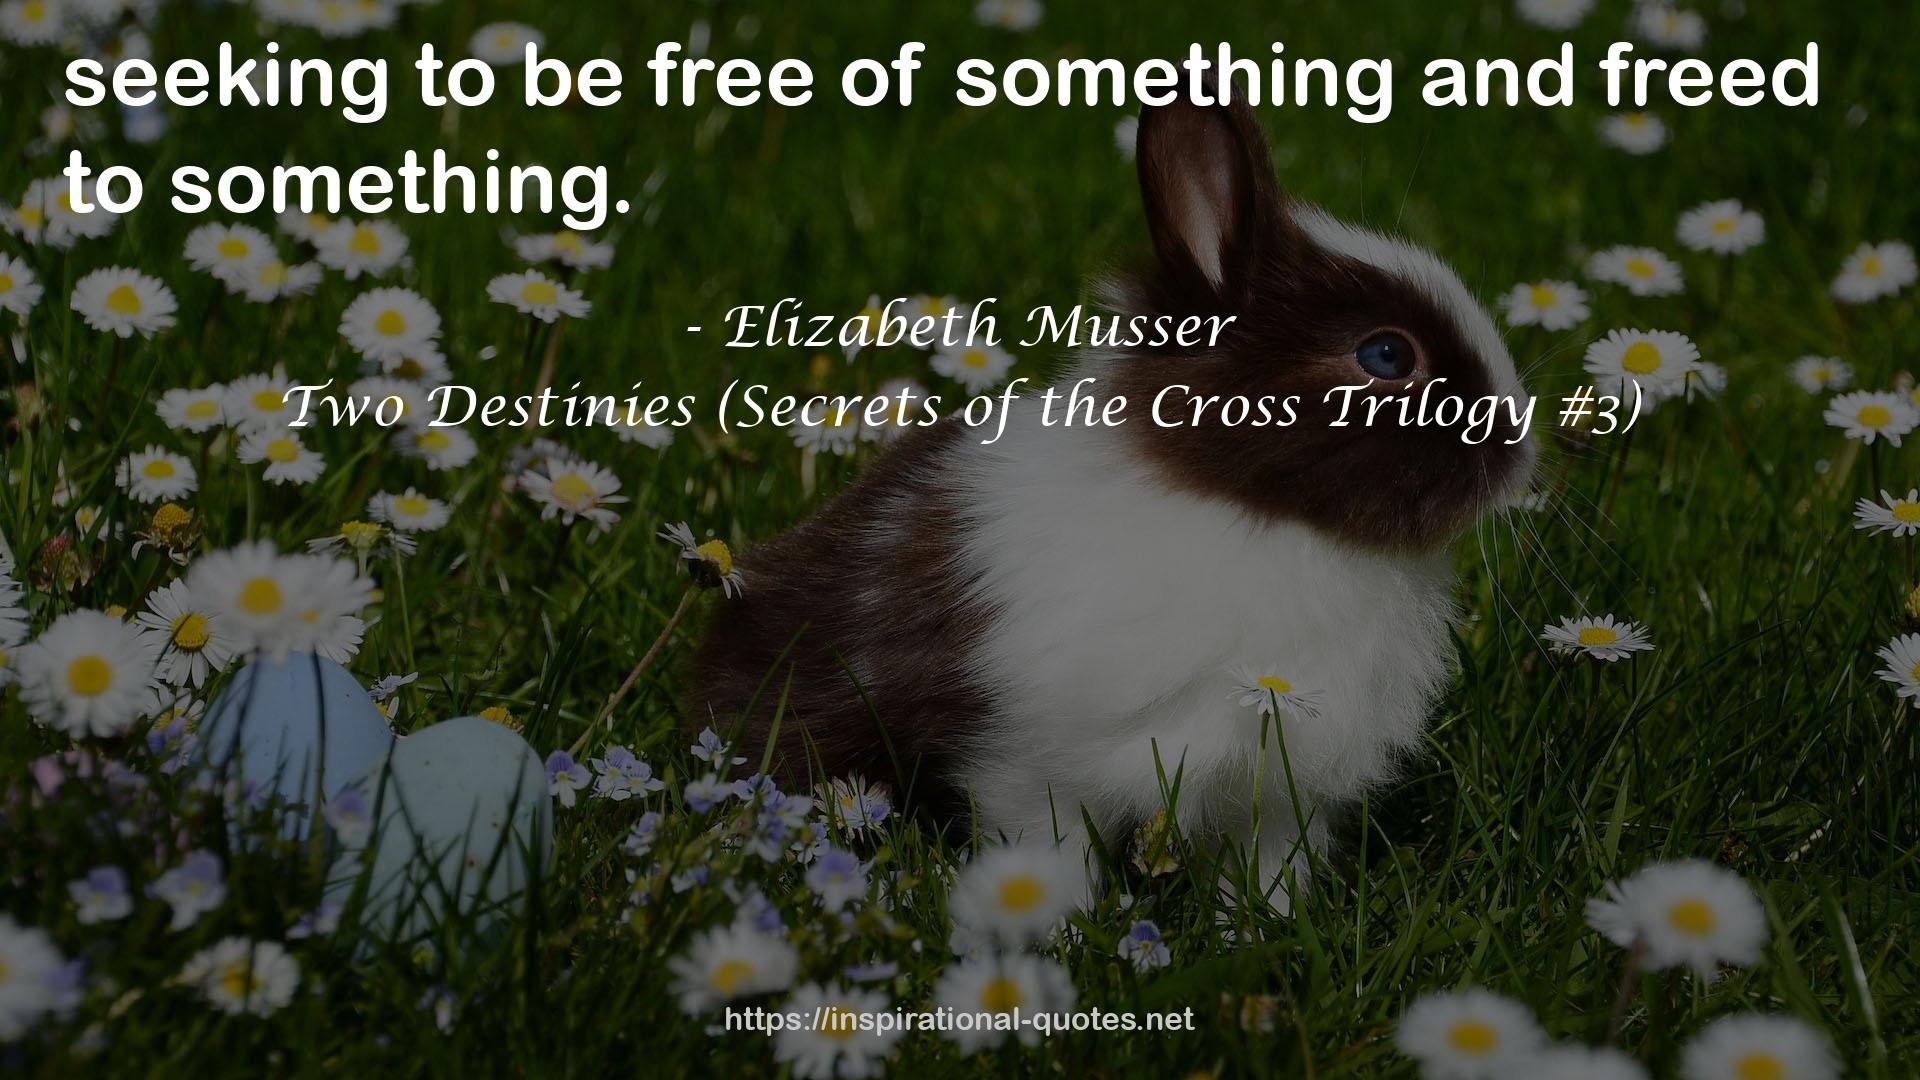 Two Destinies (Secrets of the Cross Trilogy #3) QUOTES